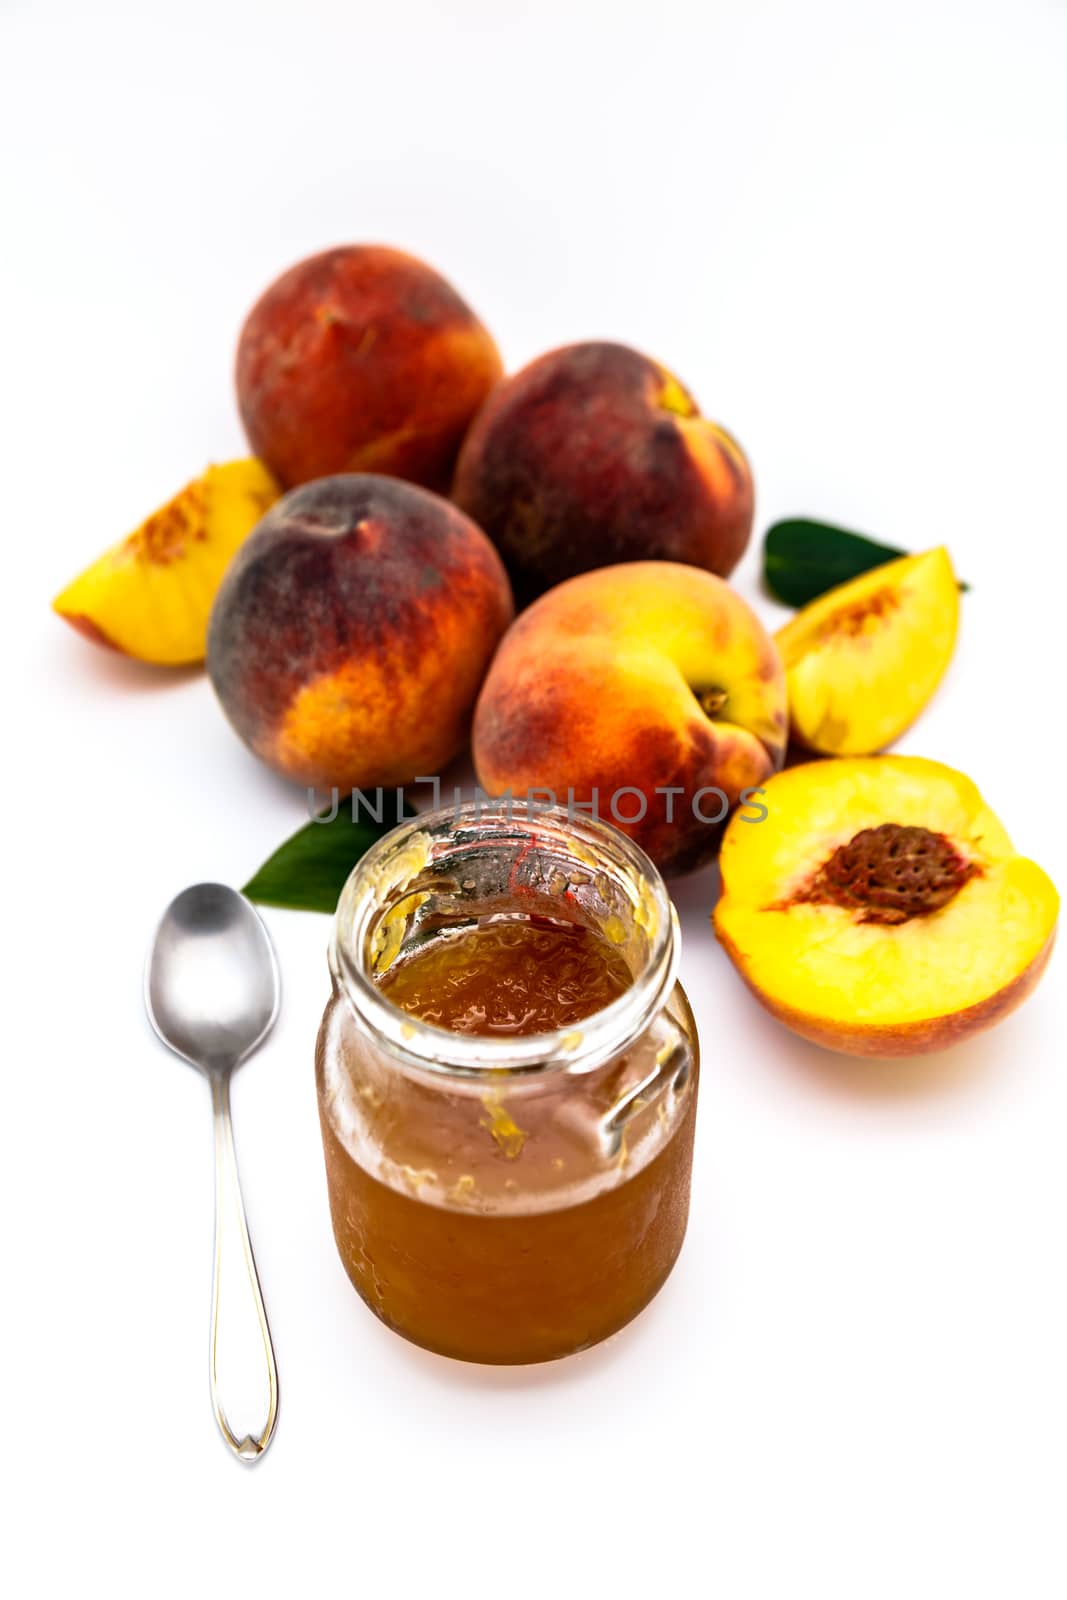 Composition of a bunch of peaches with a jar of jam on a white background